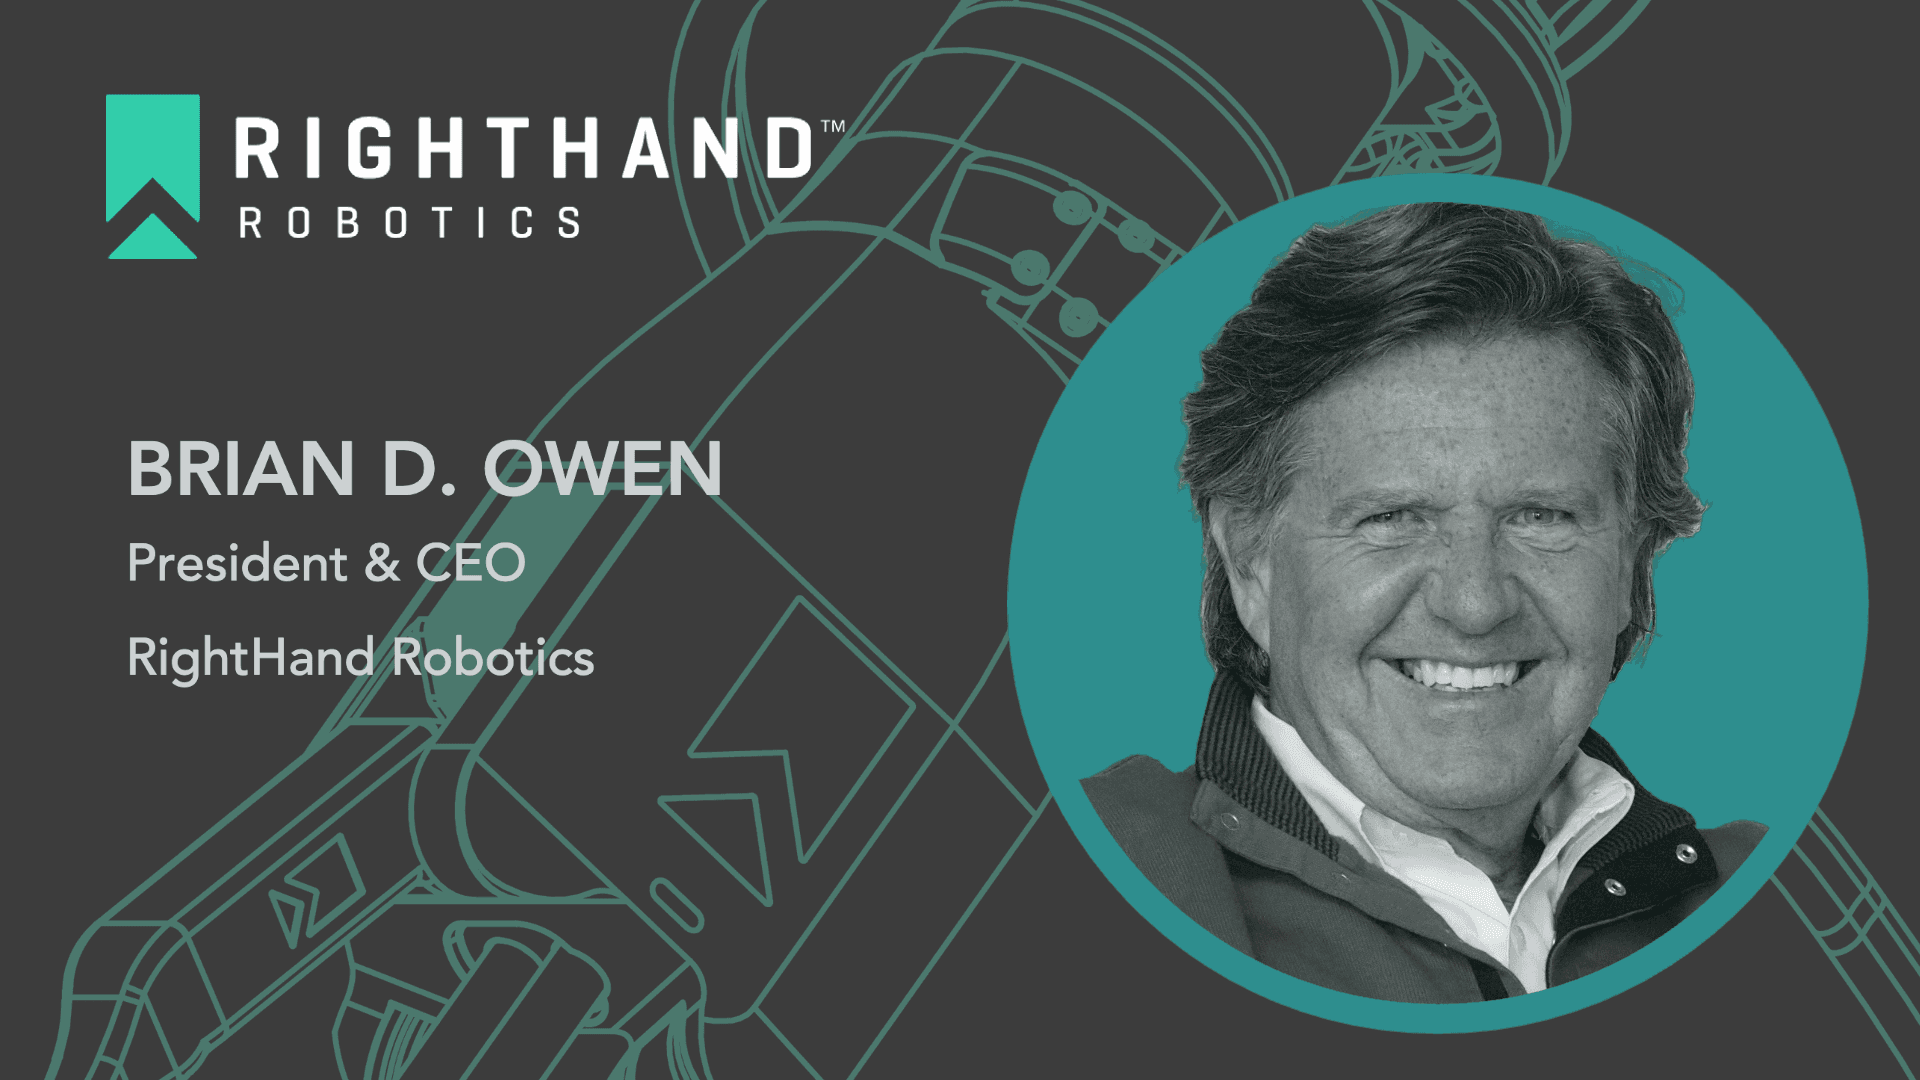 The Latest Article: Righthand robotics appoints brian d. owen as new ceo to drive the next level of growth for the company